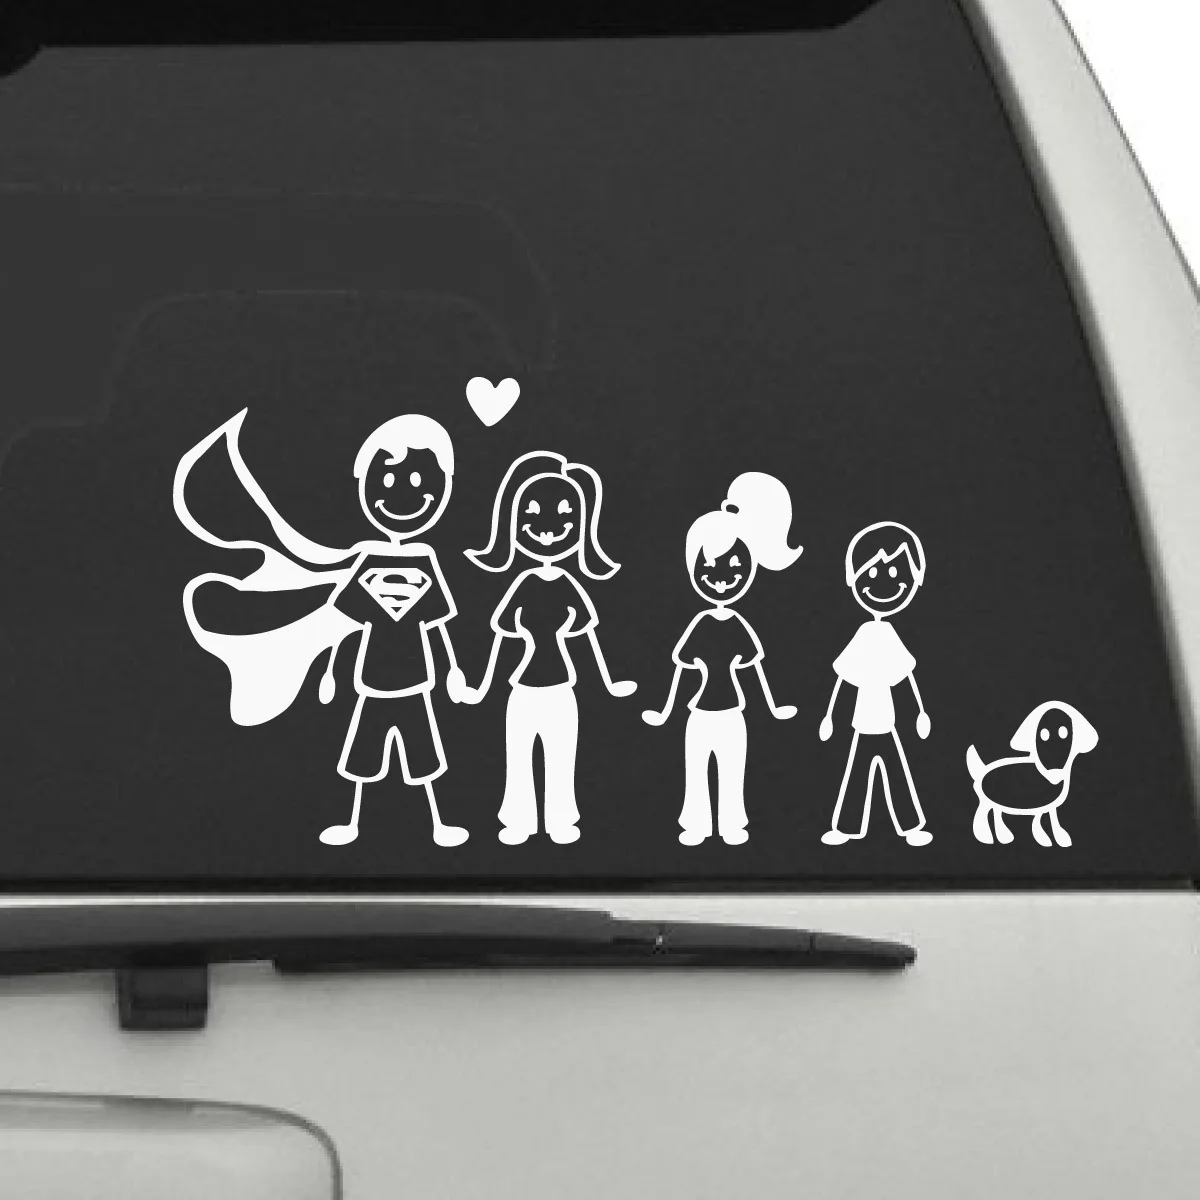 Family Stickers For Car, High Quality Family Stickers For Car,Car Sticker.....